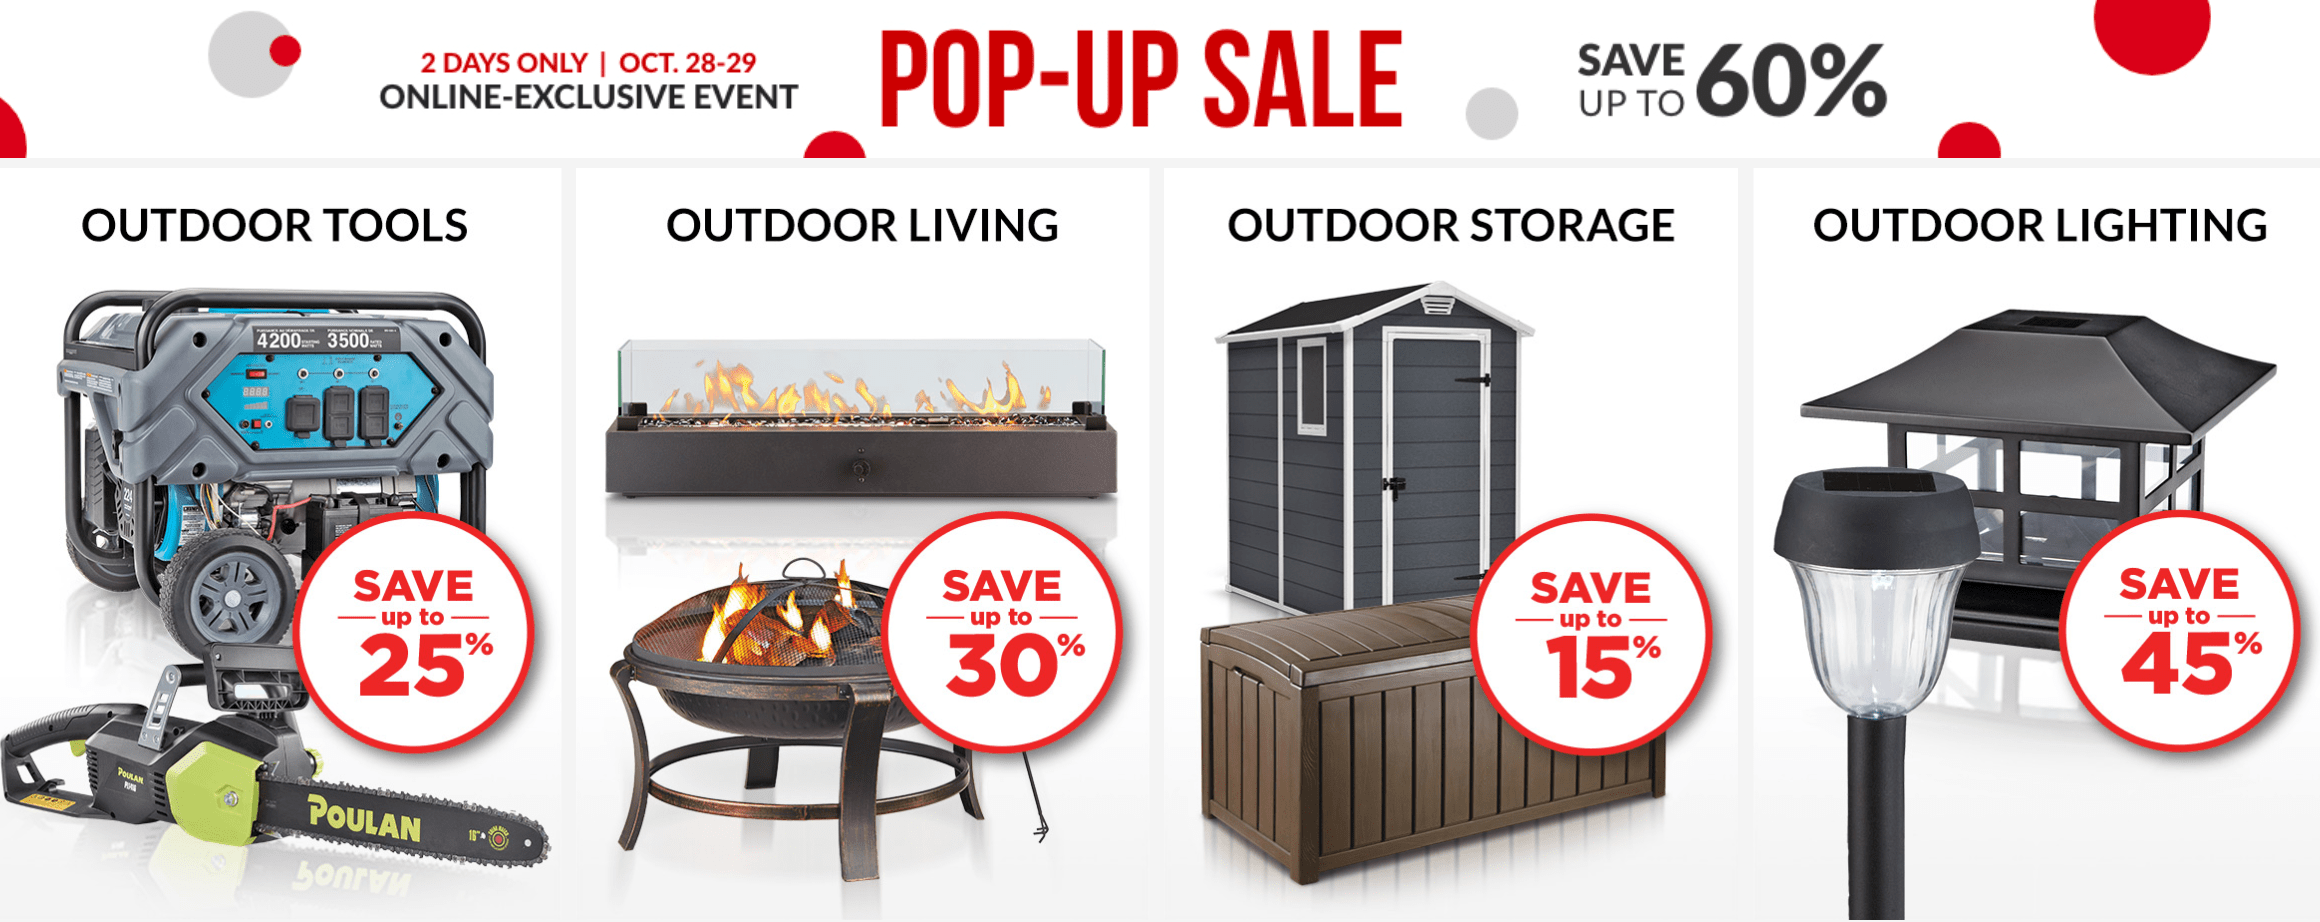 Canadian Tire Pop-Up Sale: Save Up to 60% Off Top Products - Canadian ...